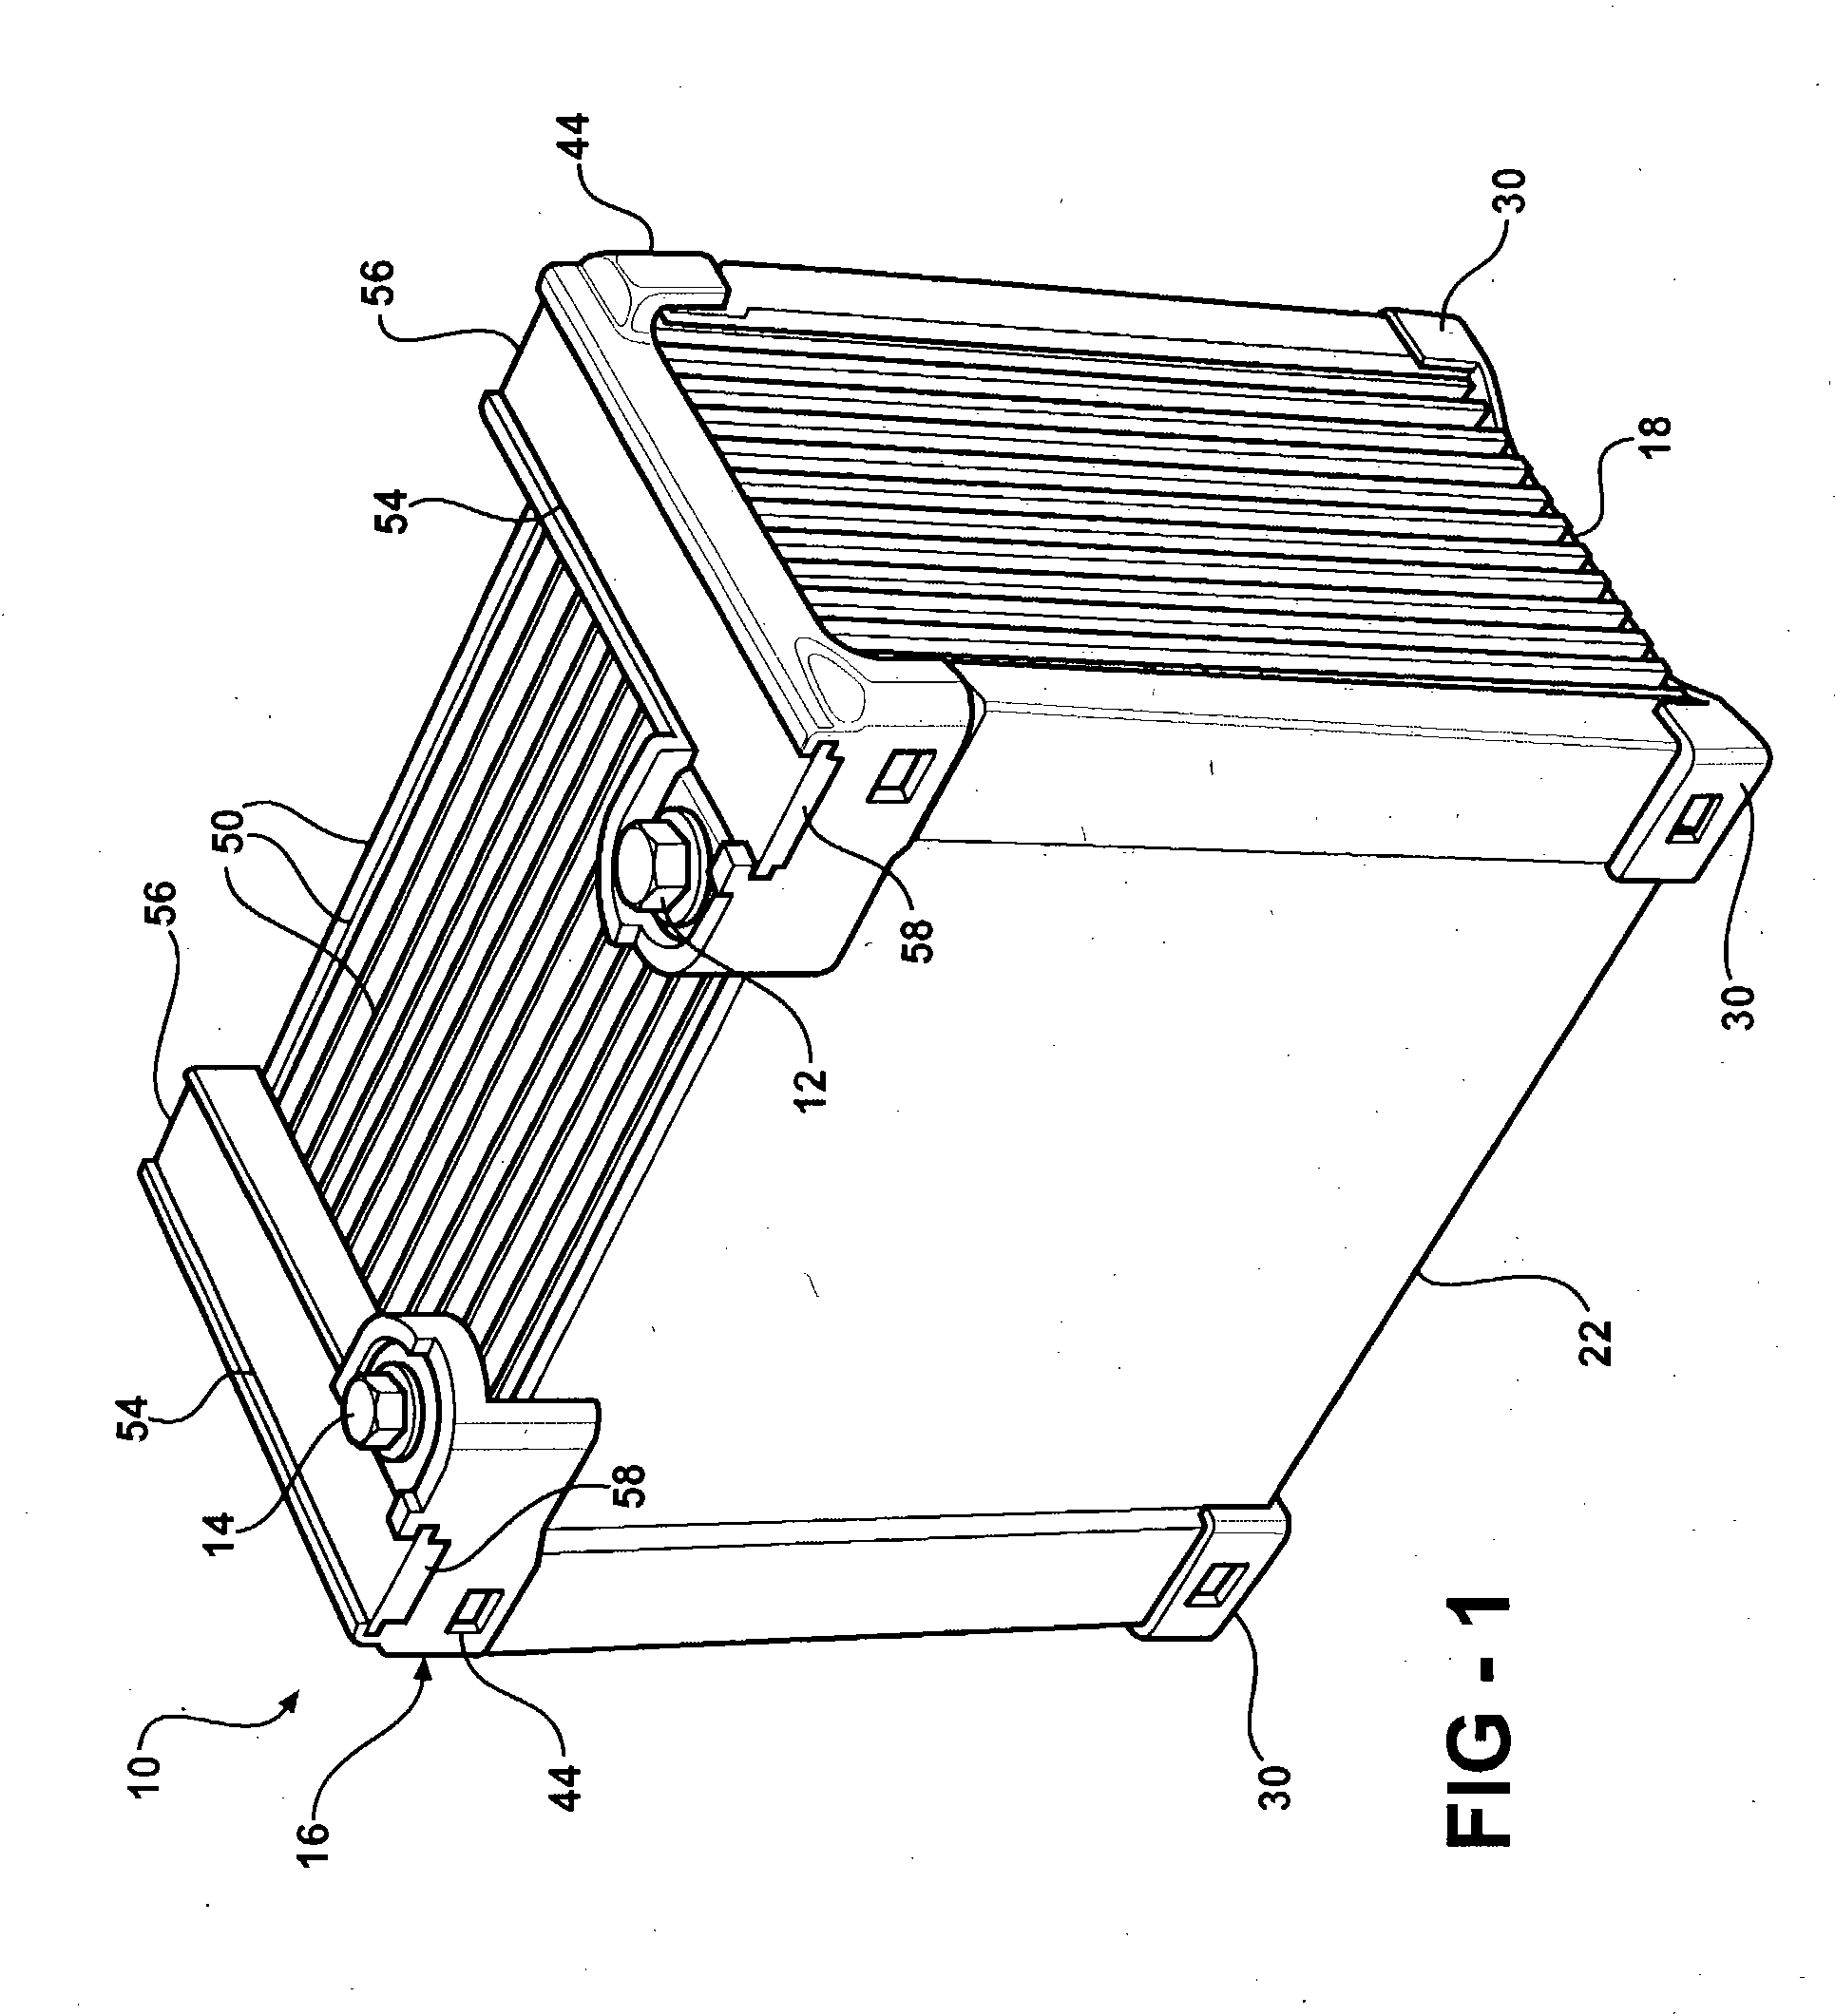 Battery assembly and method of making same